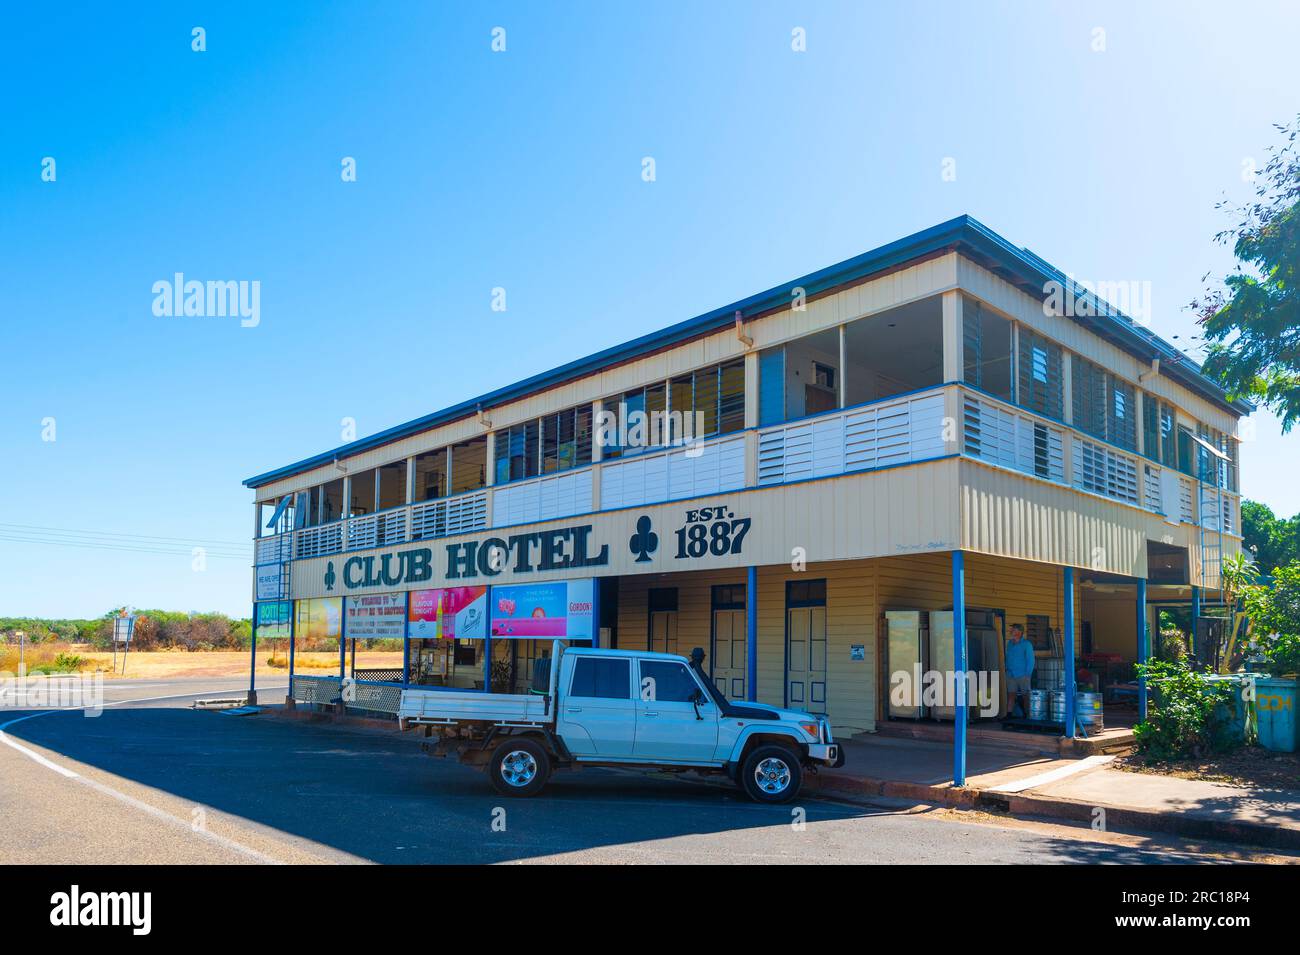 View of the exterior of the old Club Hotel, 1887, in the small rural town of Croydon, Gulf Savannah, Queensland, QLD, Australia Stock Photo